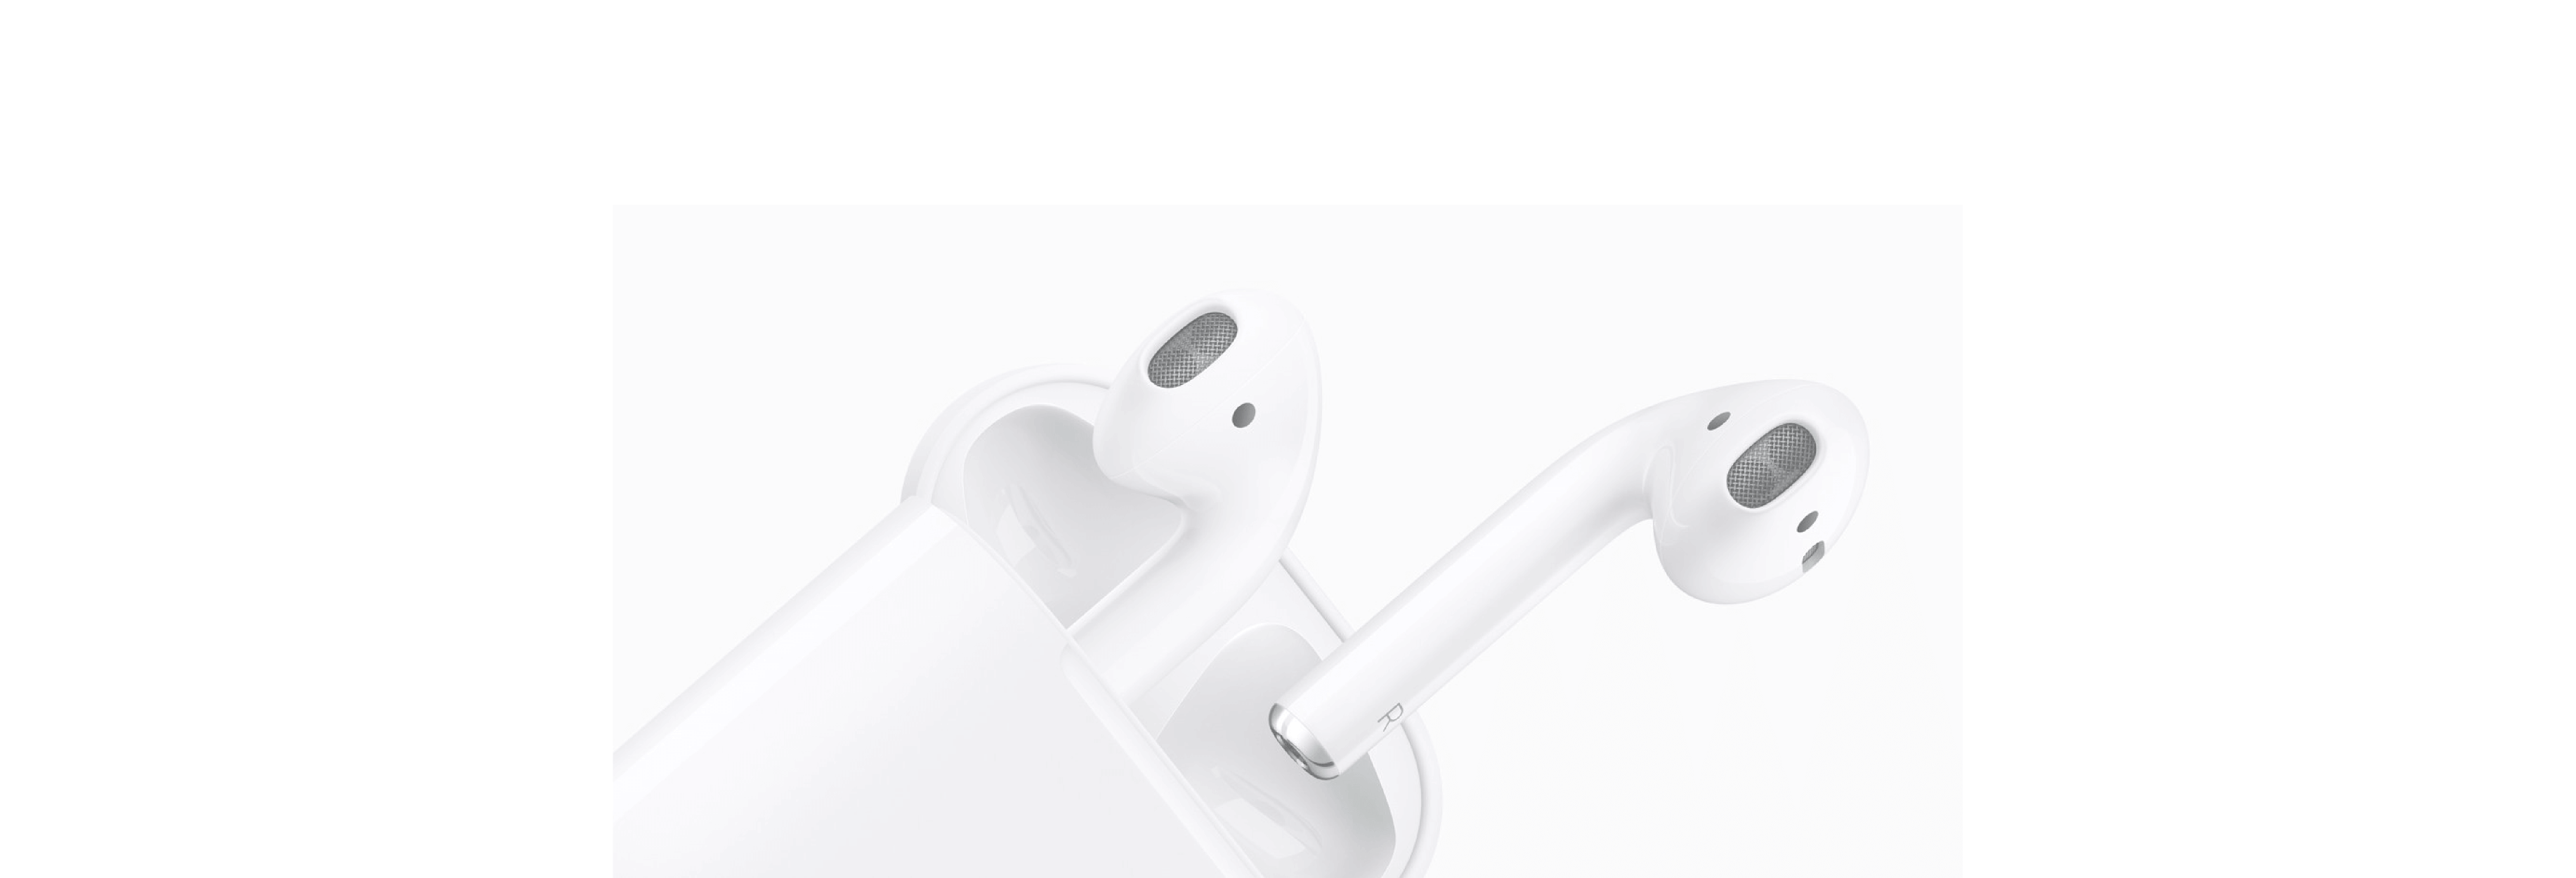 How to make your AirPods and iPhone into a Live Listening system